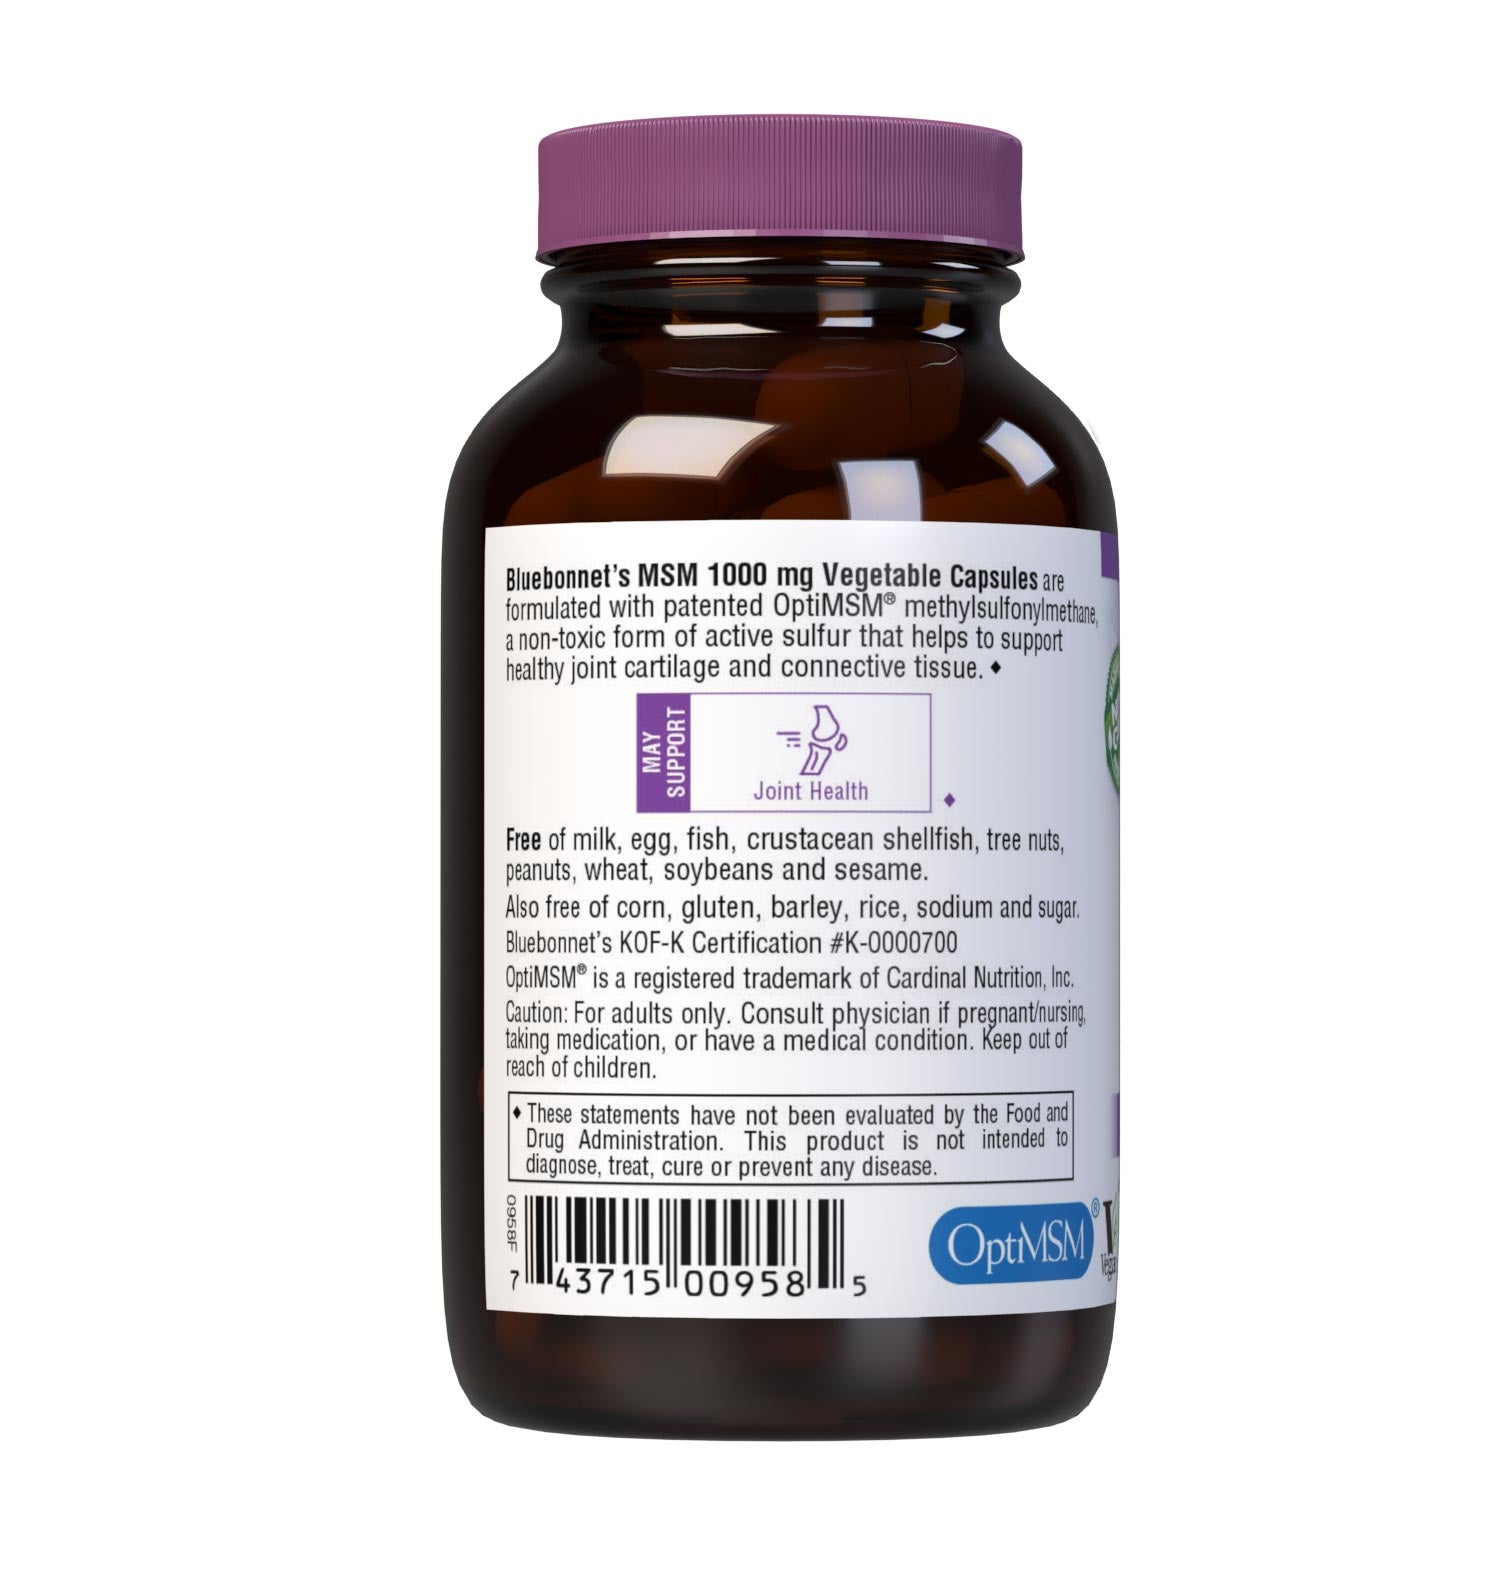 Bluebonnet’s MSM 1000 mg 60 Vegetable Capsules are formulated with patented OptiMSM methylsulfonylmethane, a non-toxic form of active sulfur that is tested in our own state-of-the-art laboratory for purity and potency. MSM helps support healthy joint cartilage and connective tissue. Description panel. #size_60 count